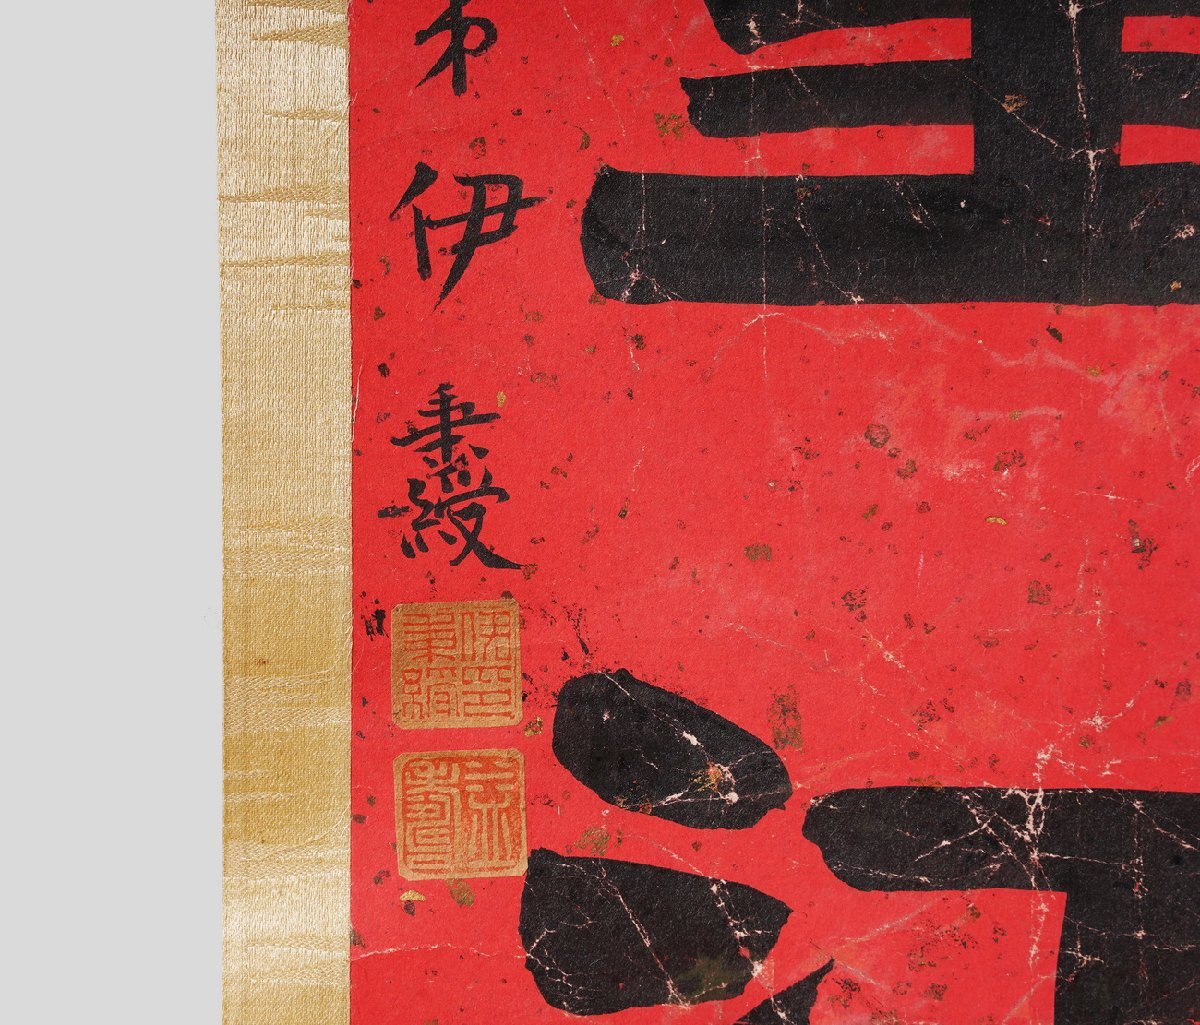 [. old .]. have Kansai auction purchase [... paper ] China Kiyoshi era writing person paper book@[ paper law against .*. axis ] also box autograph guarantee to coil thing China . China calligraphy 0410-LCS12